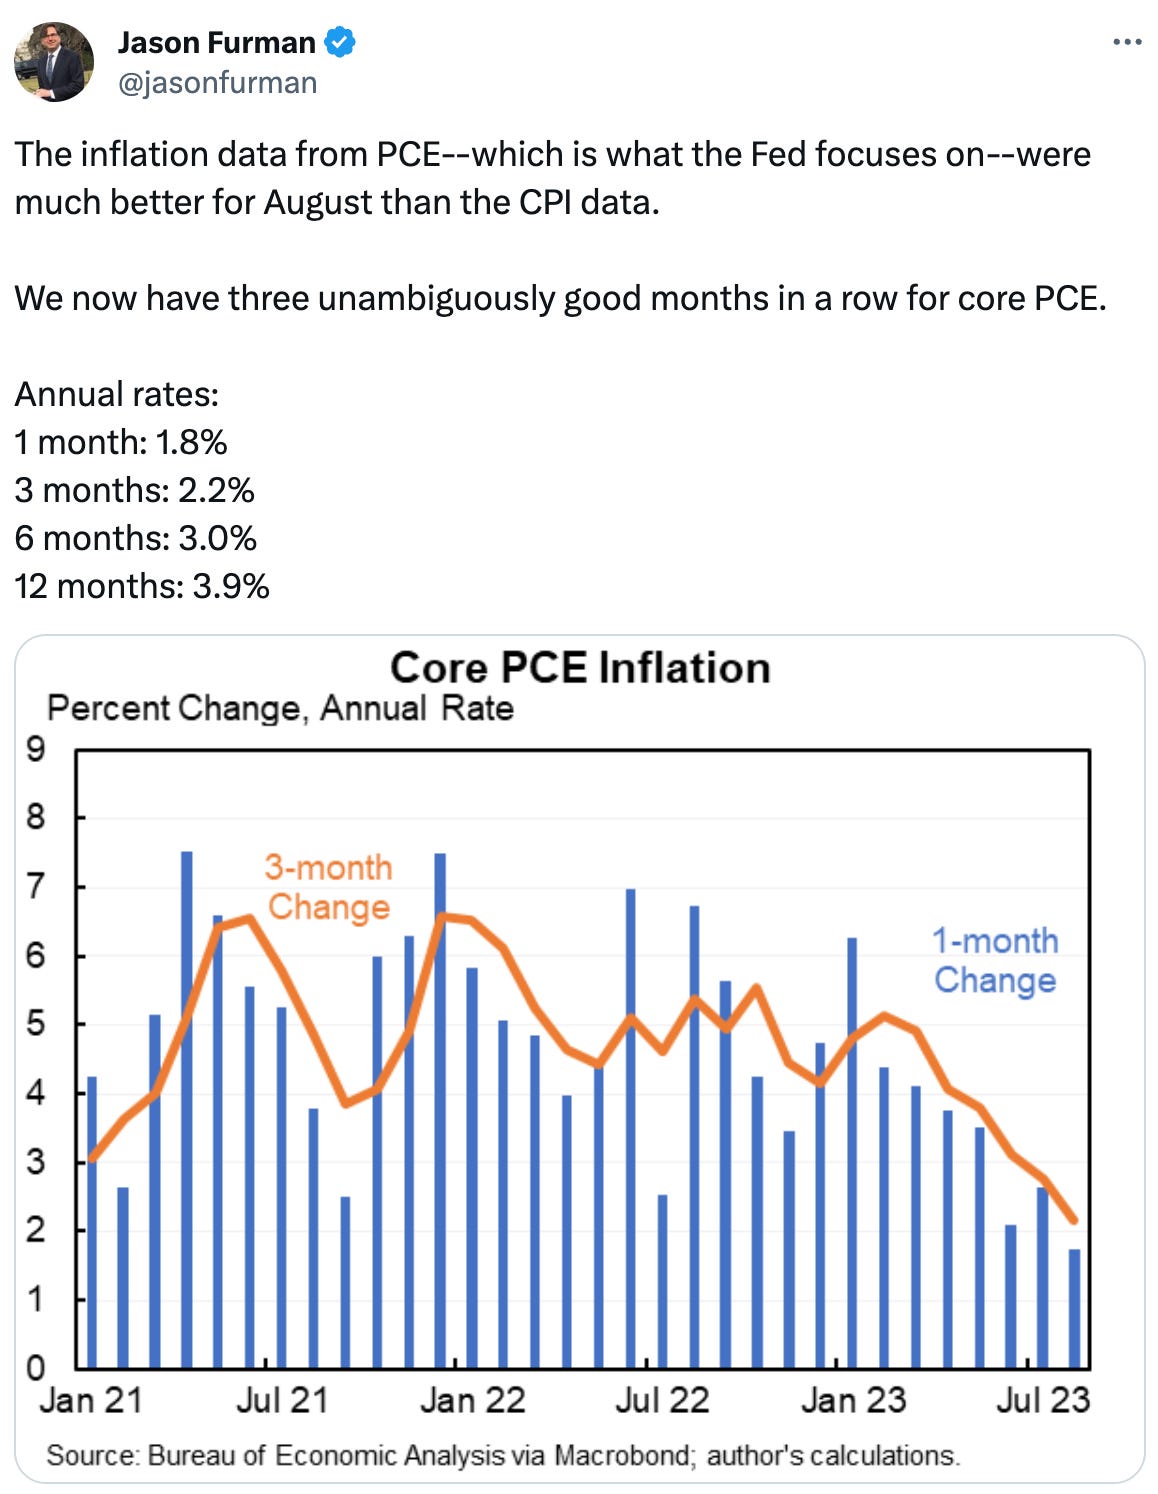  See new posts Conversation Jason Furman @jasonfurman The inflation data from PCE--which is what the Fed focuses on--were much better for August than the CPI data.  We now have three unambiguously good months in a row for core PCE.  Annual rates: 1 month: 1.8% 3 months: 2.2% 6 months: 3.0% 12 months: 3.9%